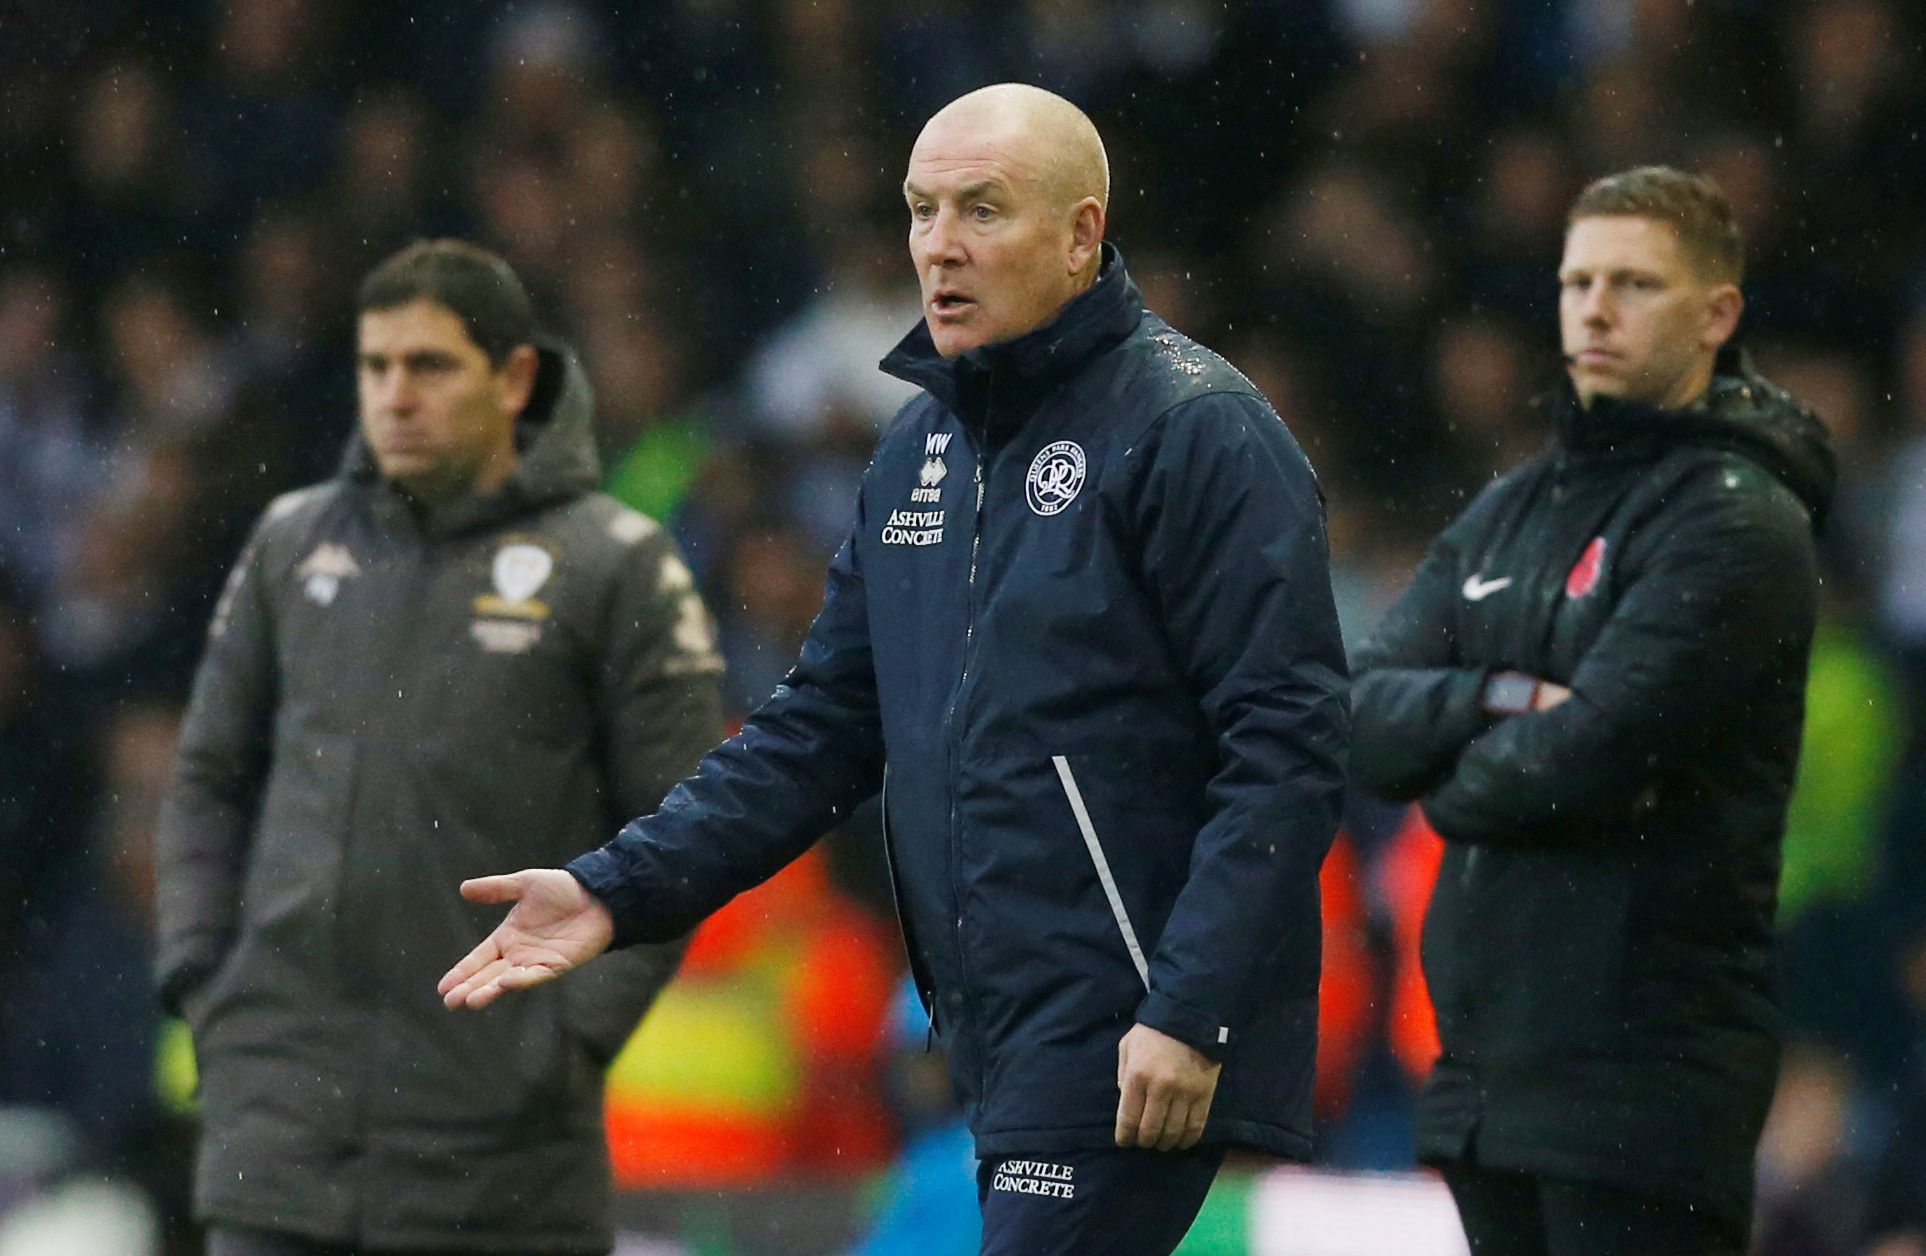 Soccer Football - Championship - Leeds United v Queens Park Rangers - Elland Road, Leeds, Britain - November 2, 2019  Queens Park Rangers manager Mark Warburton  Action Images/Ed Sykes  EDITORIAL USE ONLY. No use with unauthorized audio, video, data, fixture lists, club/league logos or 